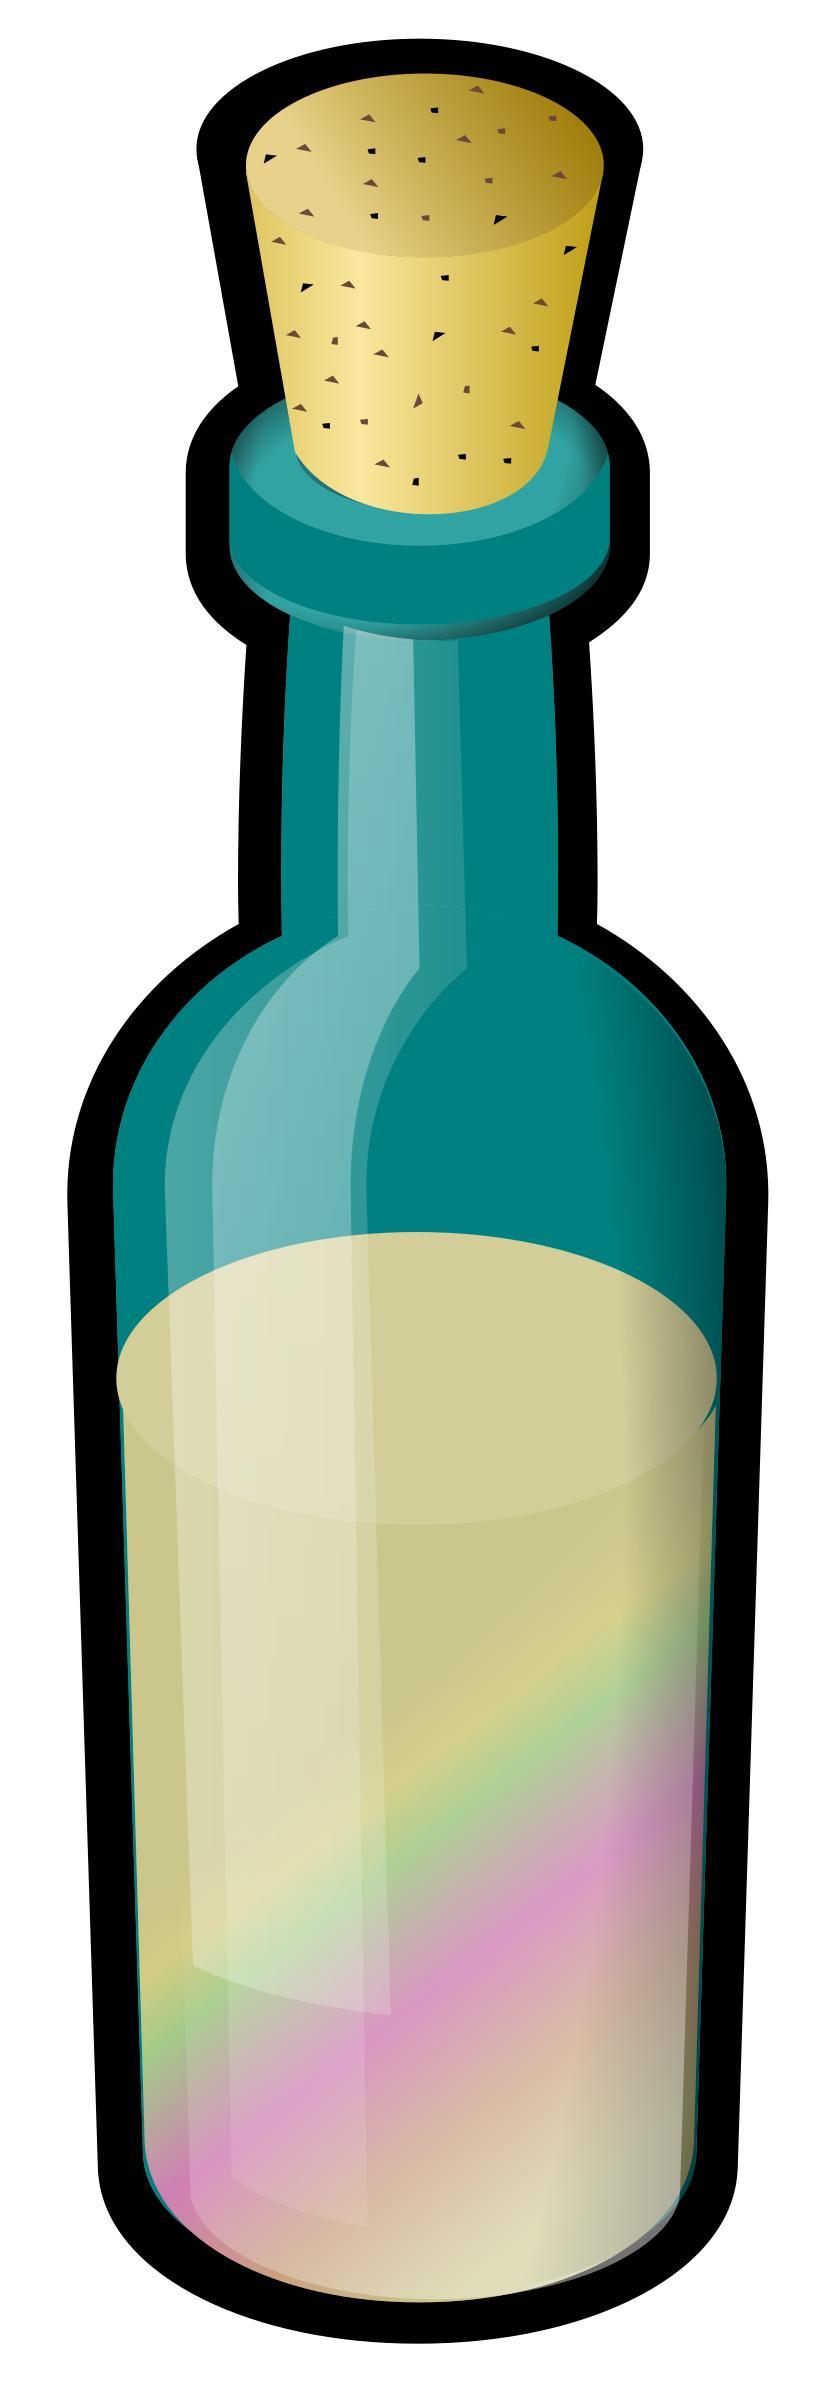 Bottle of Colored Sand, with Cork png transparent